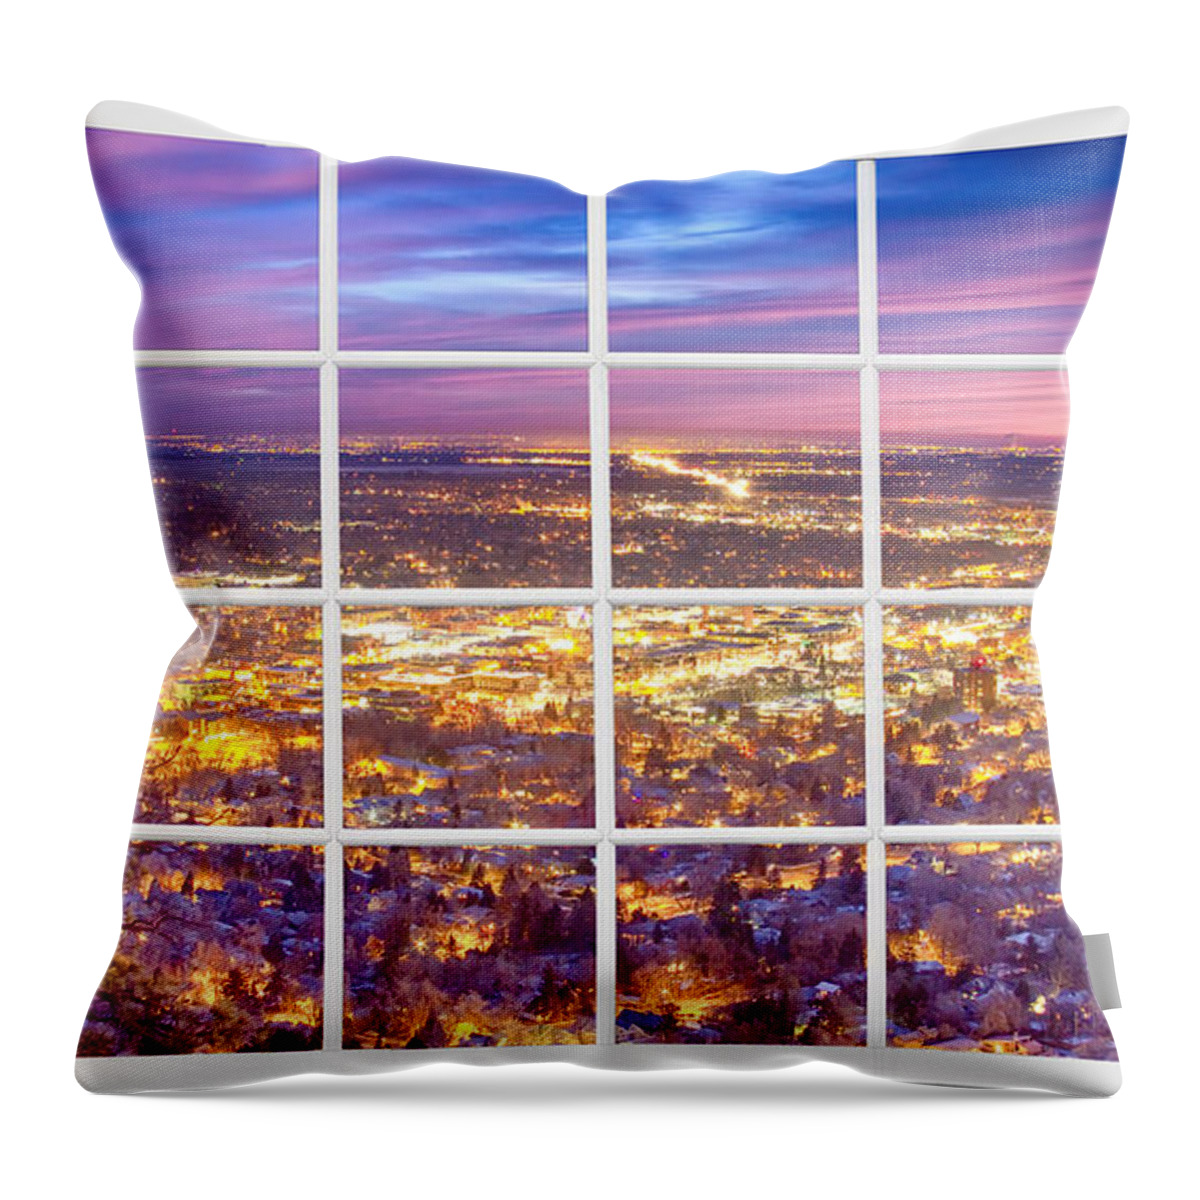 Boulder Colorado Throw Pillow featuring the photograph Downtown Boulder Colorado City Lights Sunrise Window View 8LG by James BO Insogna